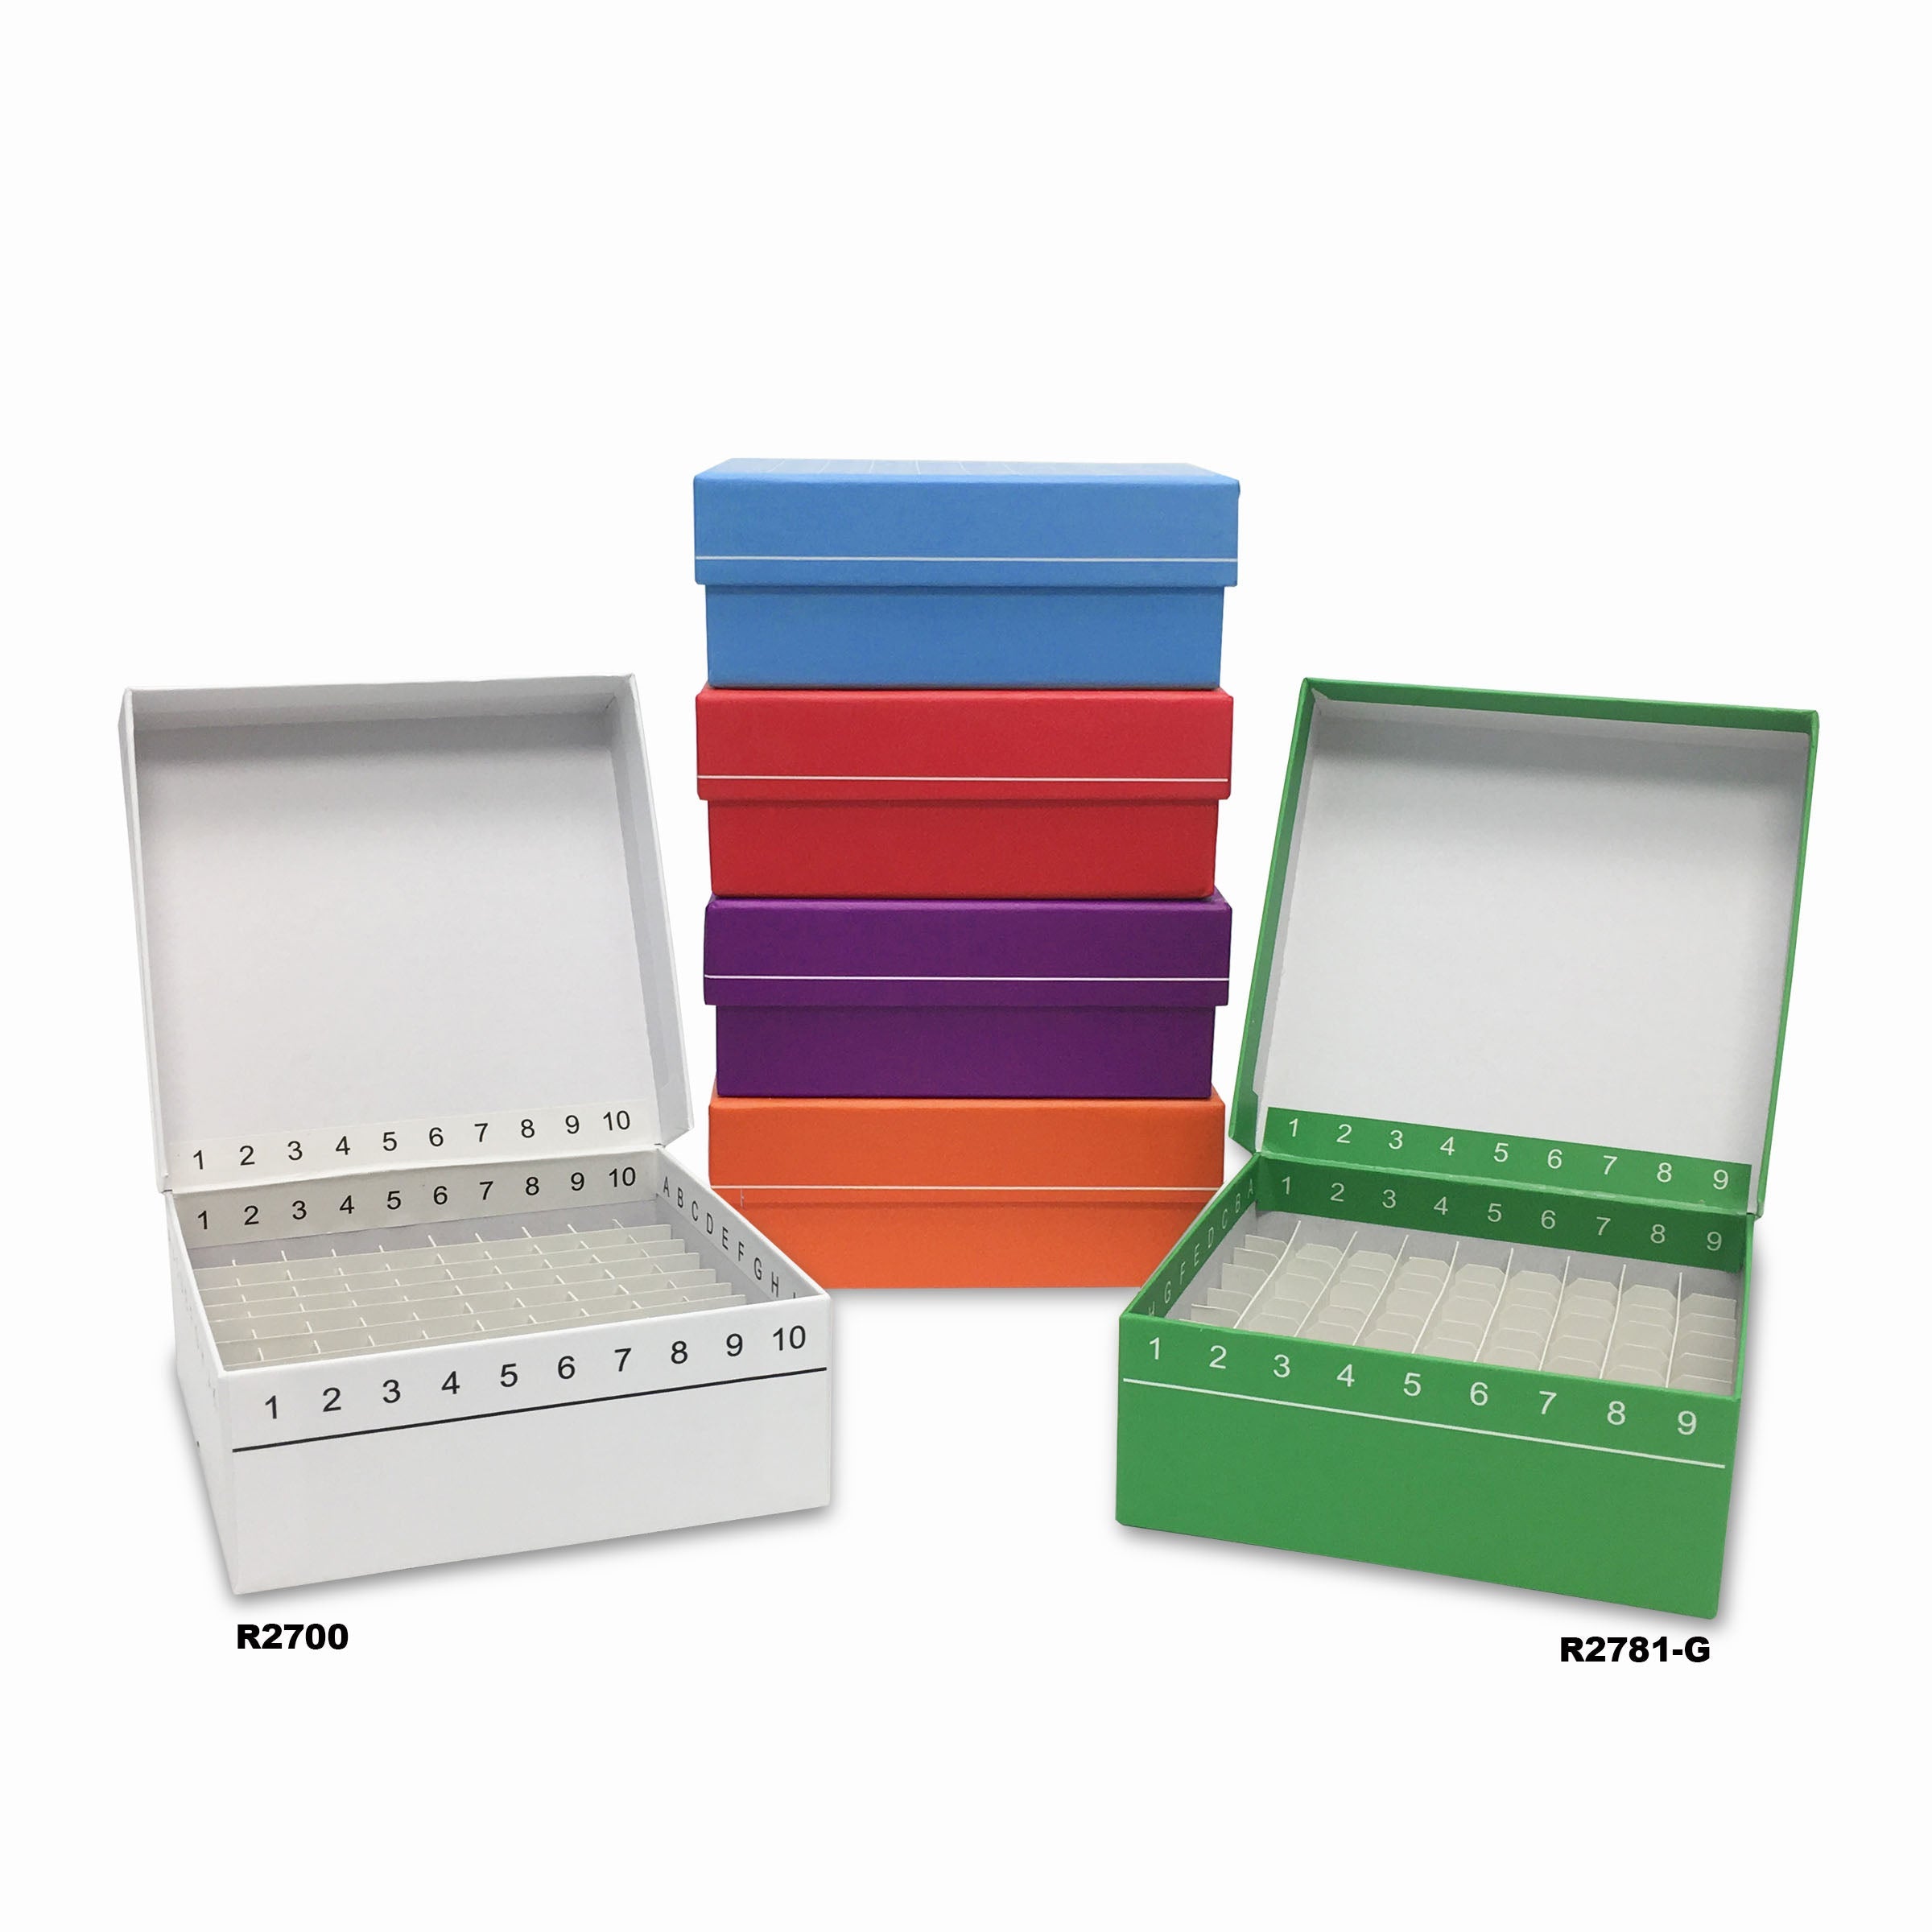 MTC Bio R2700-P, Fliptop Carboard Freezer Box with Attached Hinged Lid, 100-Place, Purple, 5/pk